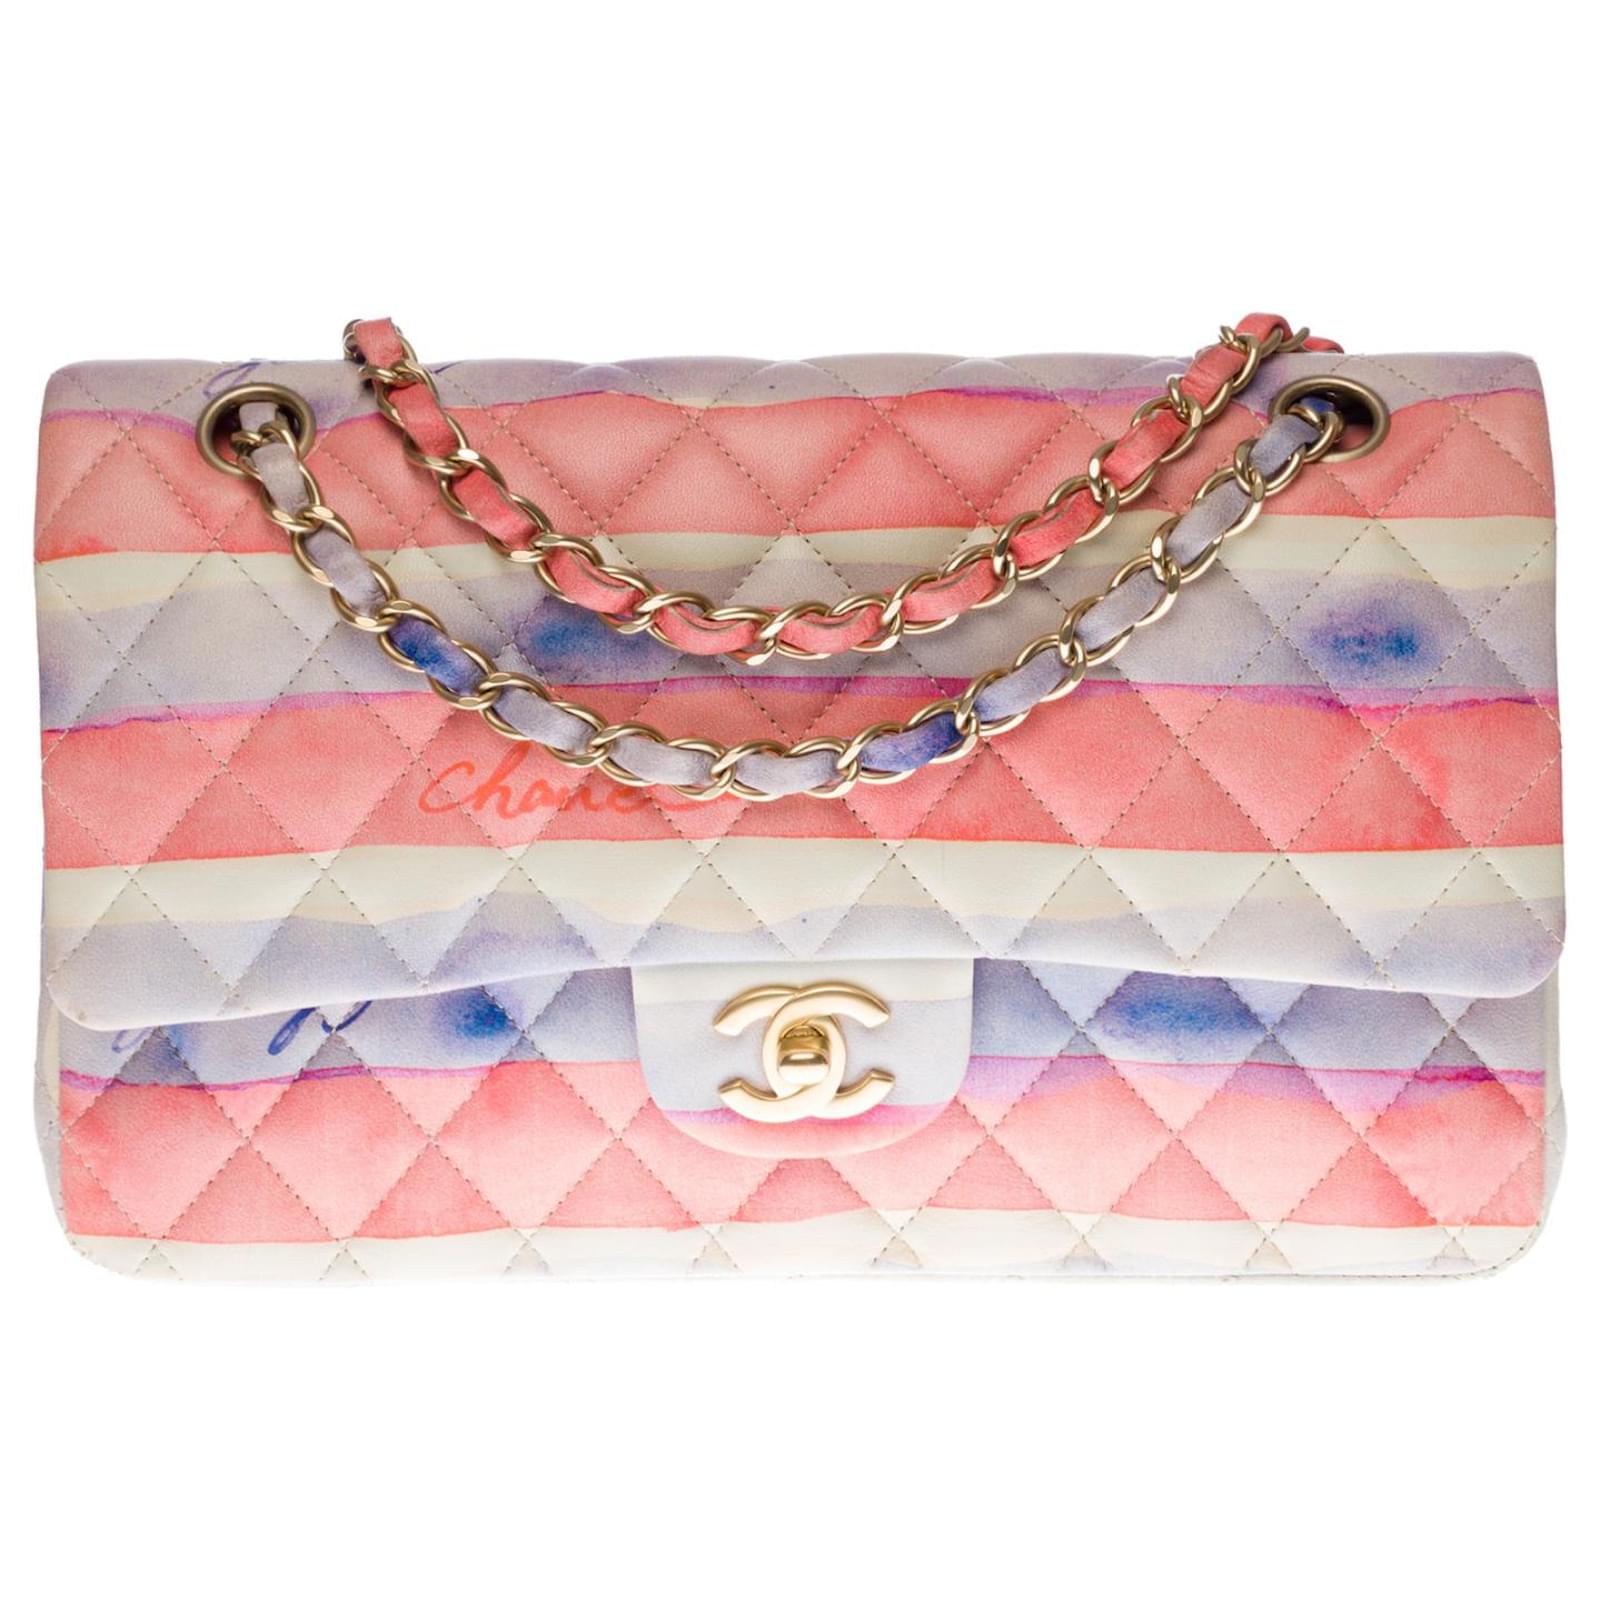 Chanel - Timeless Classic Flap Small - Shoulder bag - Catawiki